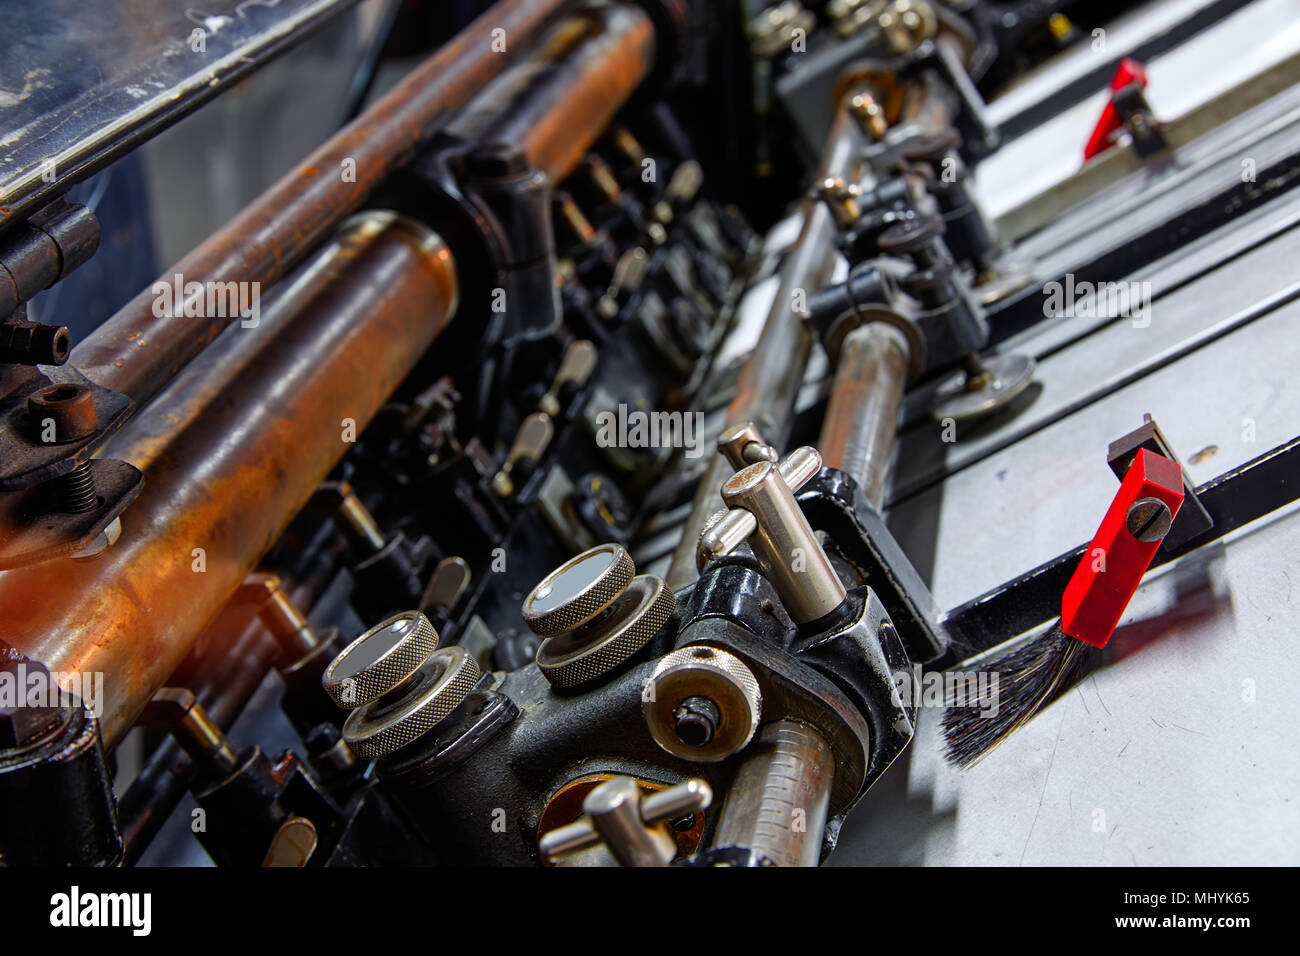 Printer lithography cylinder machine in a printing factory Stock Photo